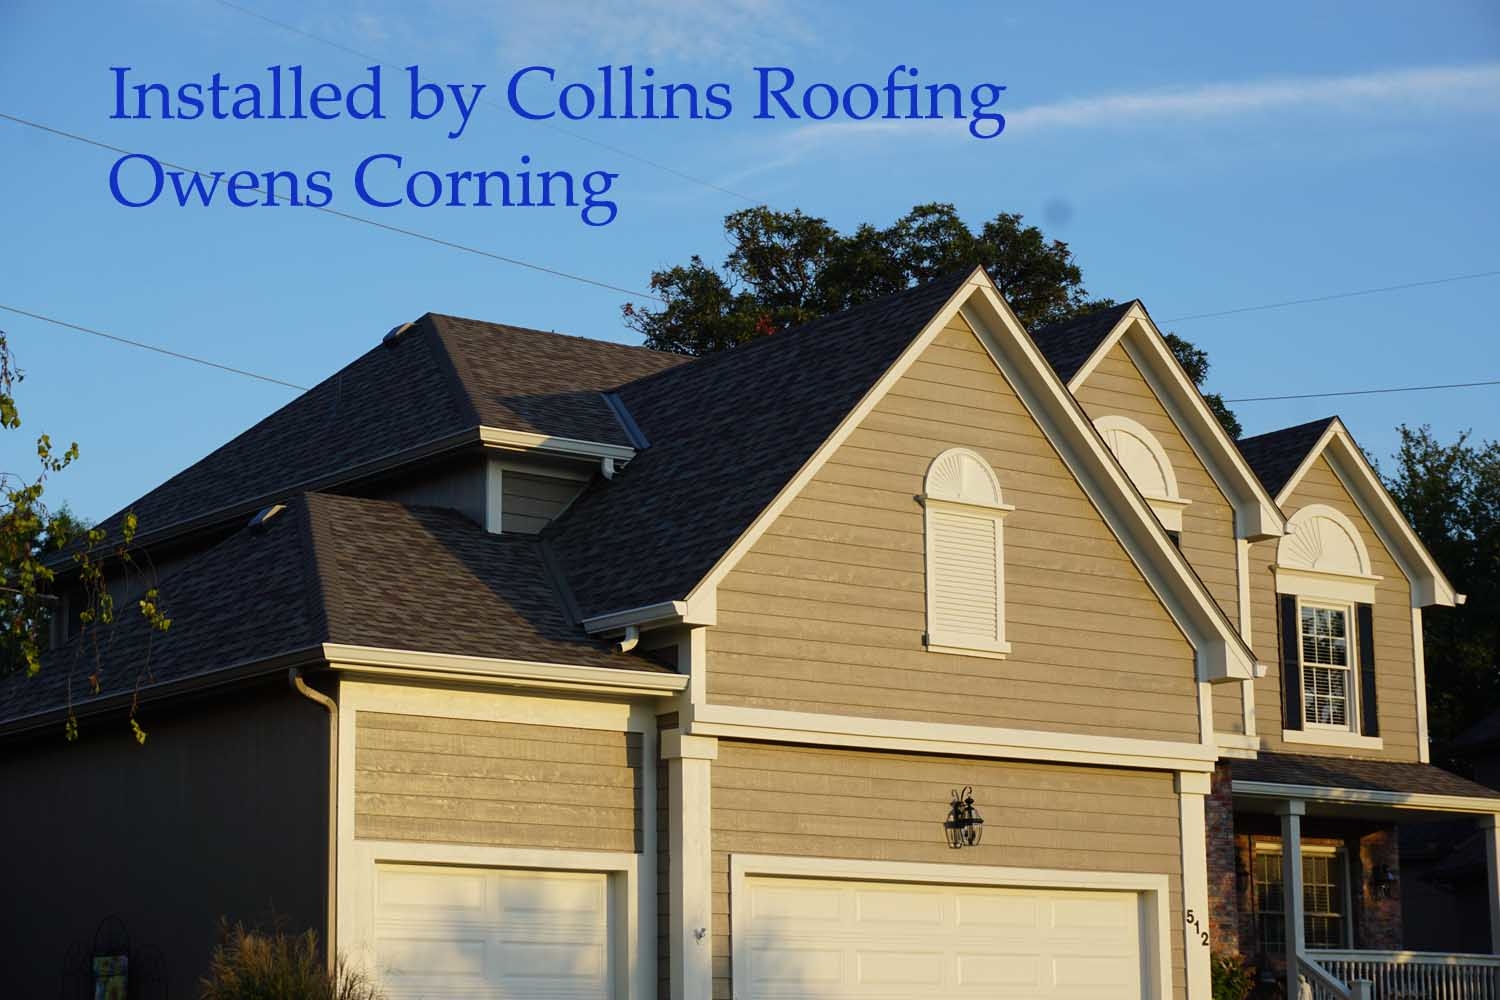 Owens Corning 30yr (Limited Lifetime) Roof System in Lees Summit, MO  installed by Collins Roofing. 

Roofing In Lees Summit